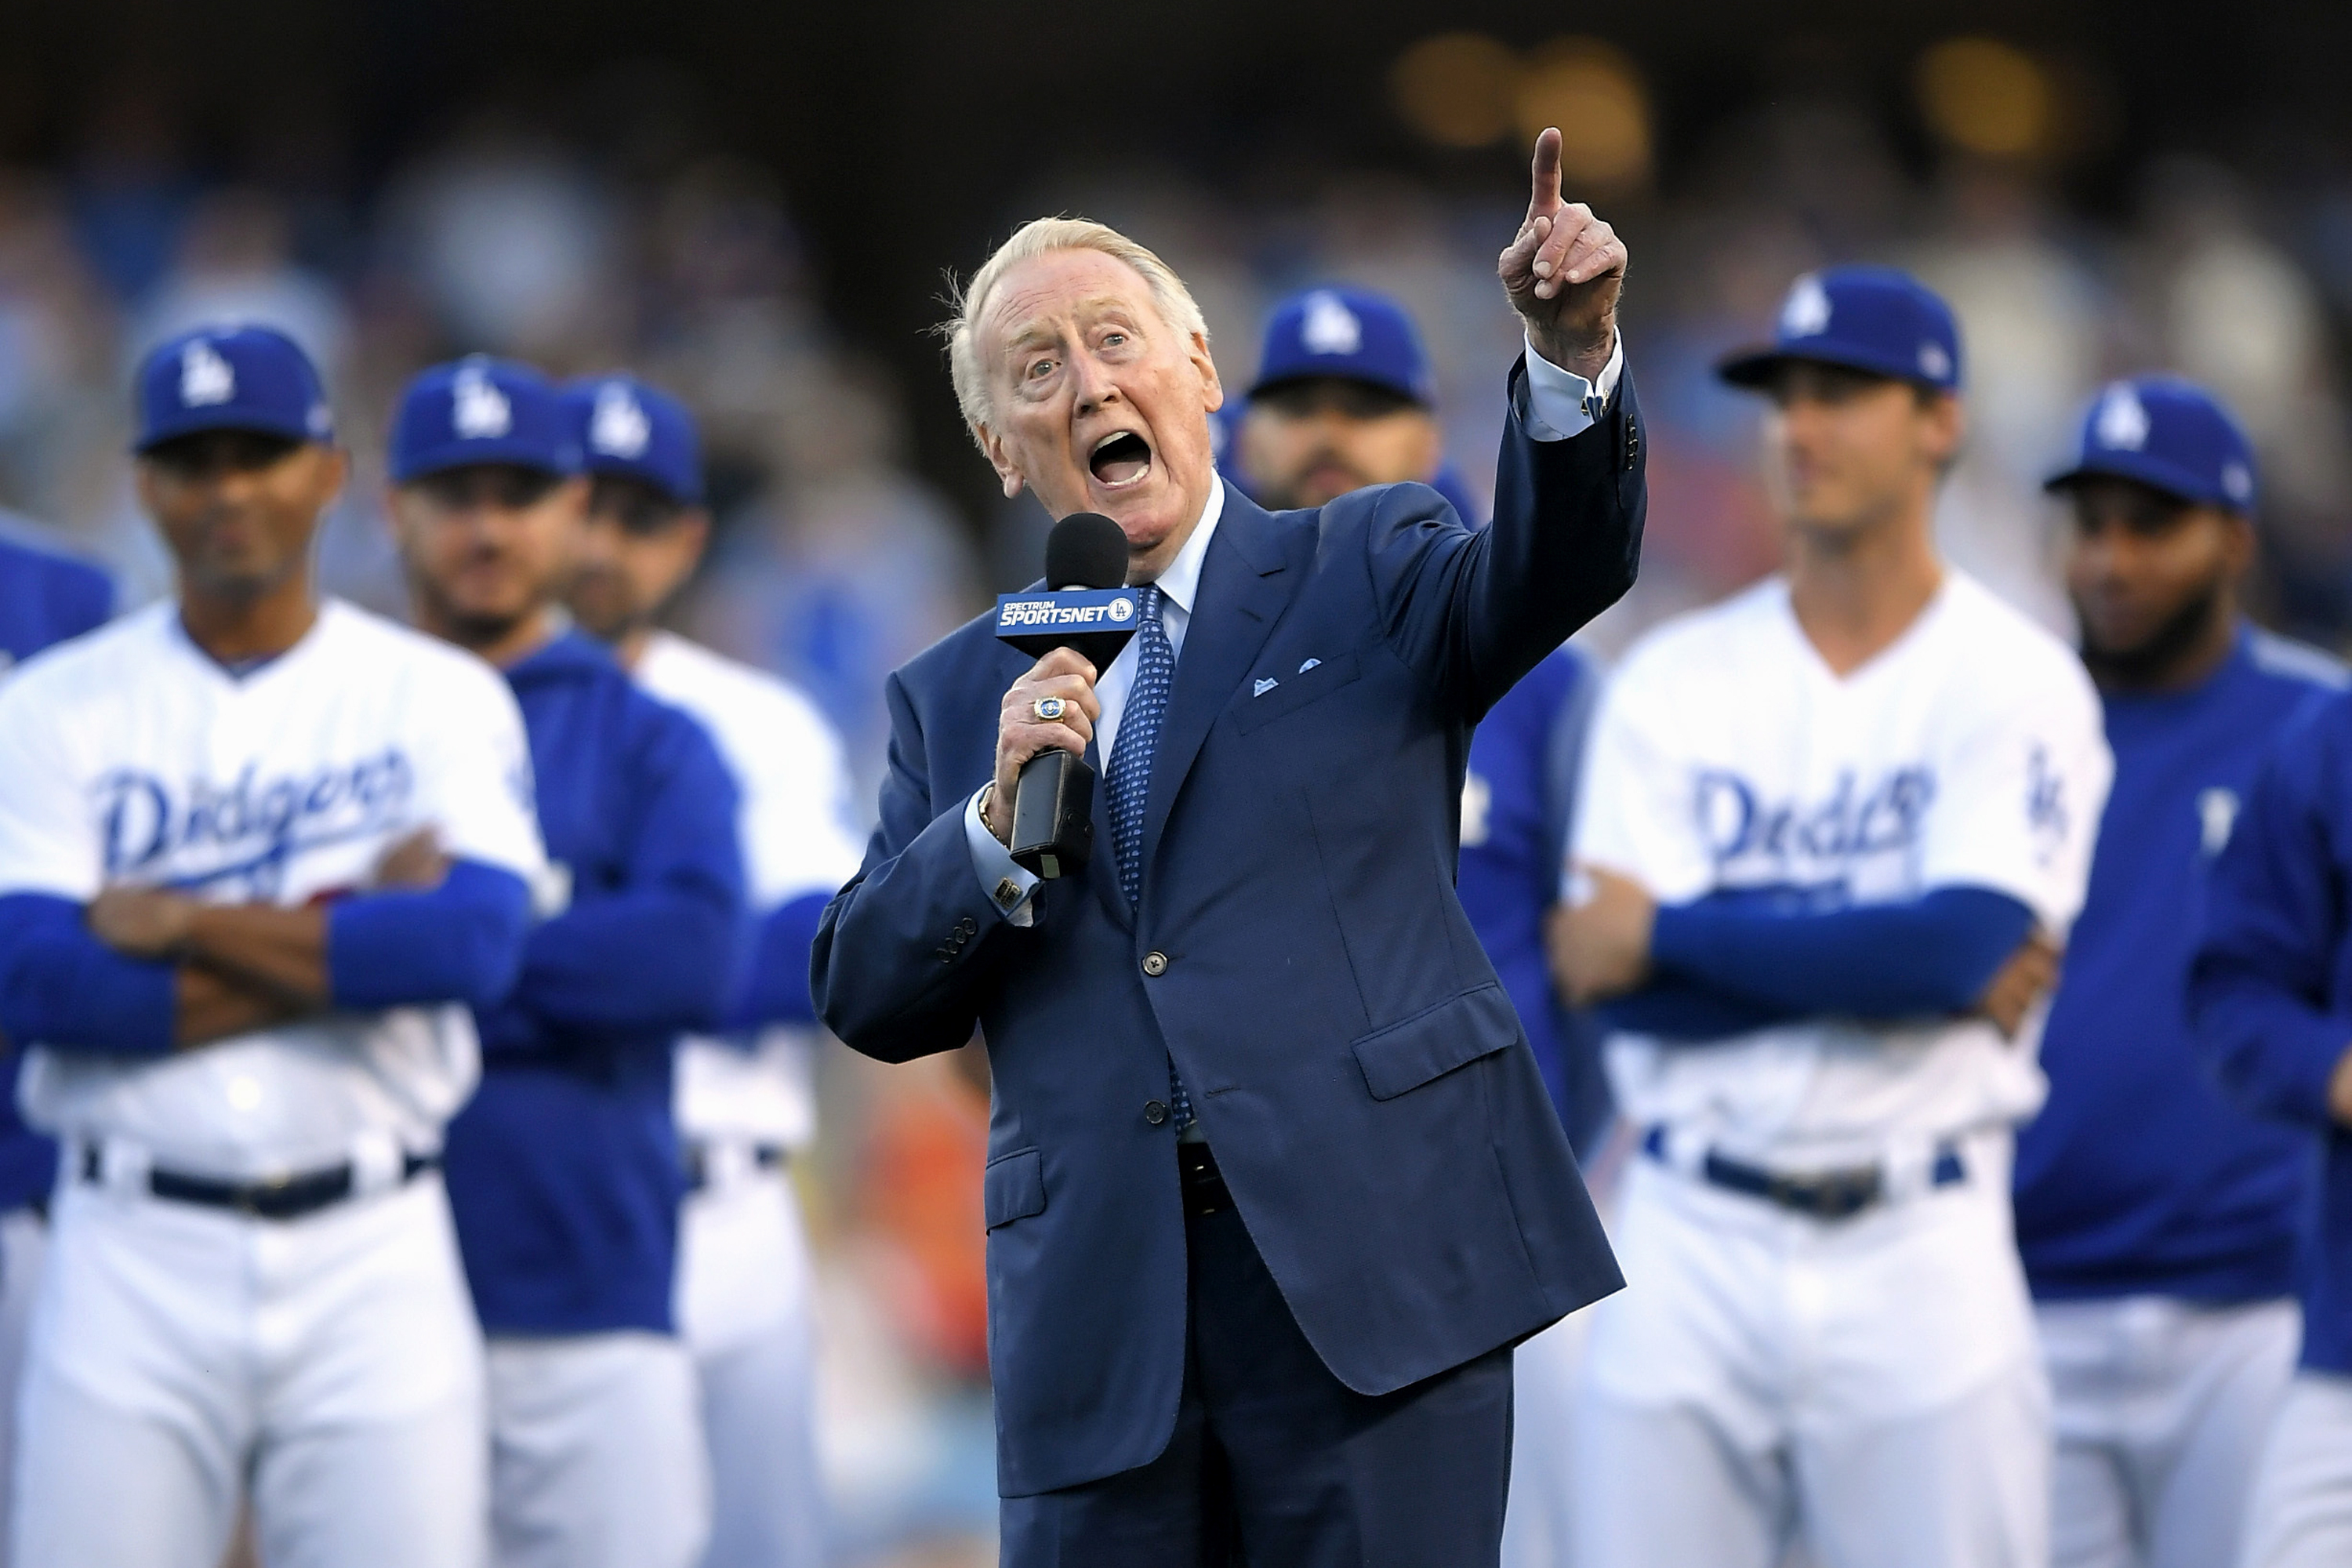 Vin Scully Auctions Off Baseball Memorabilia, Netting More Than $2 Million  – NBC Los Angeles